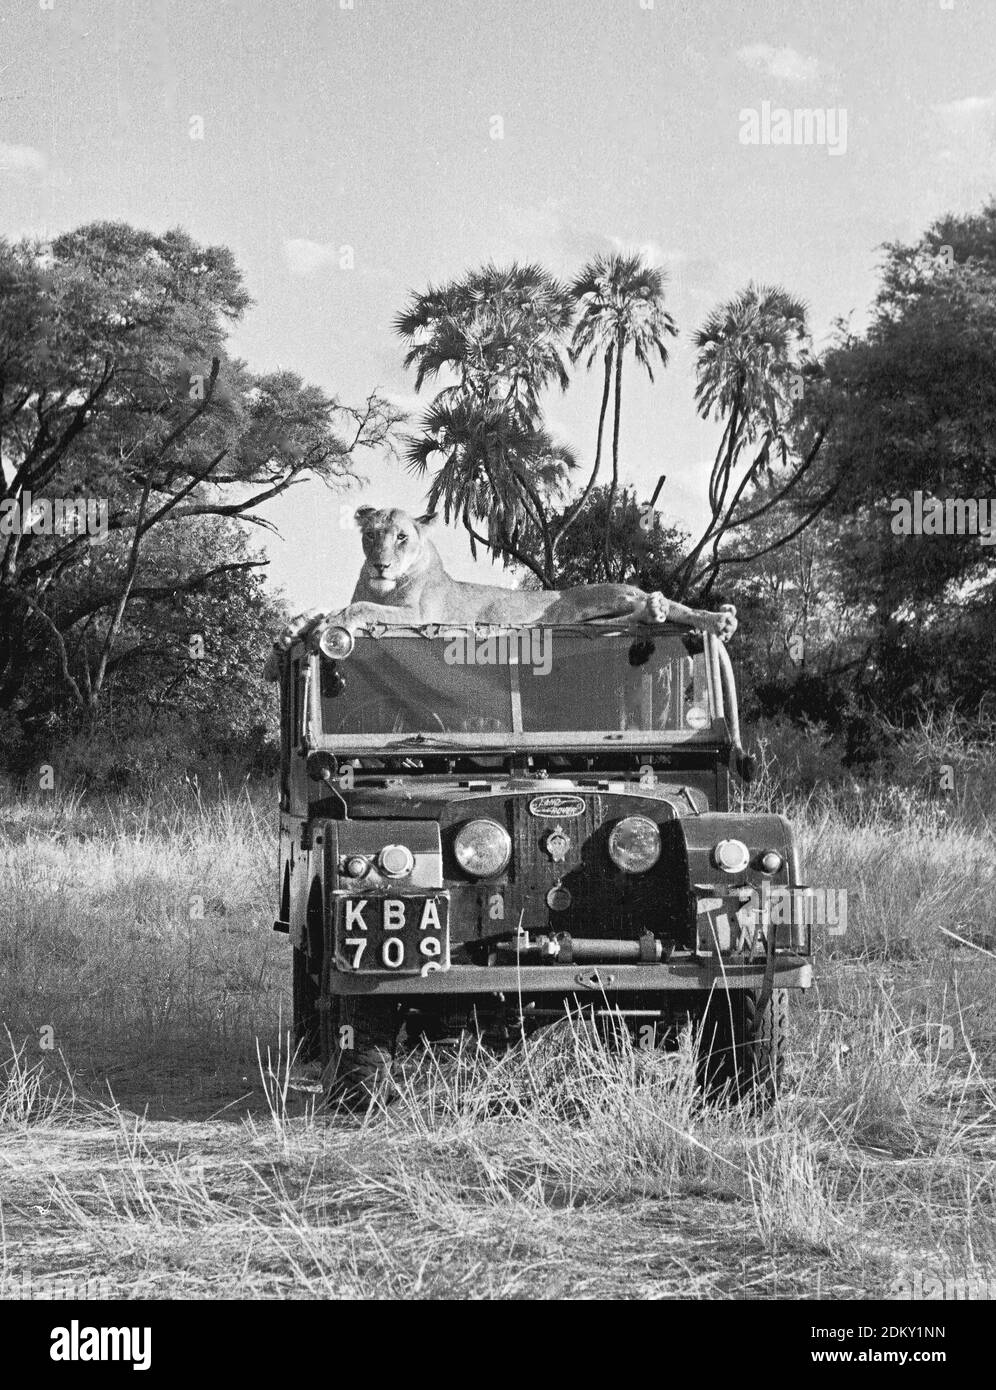 Elsa the lioness of Born Free fame lying on the roof of the Adamson's  Series 1 LandRover, Kenya Stock Photo - Alamy